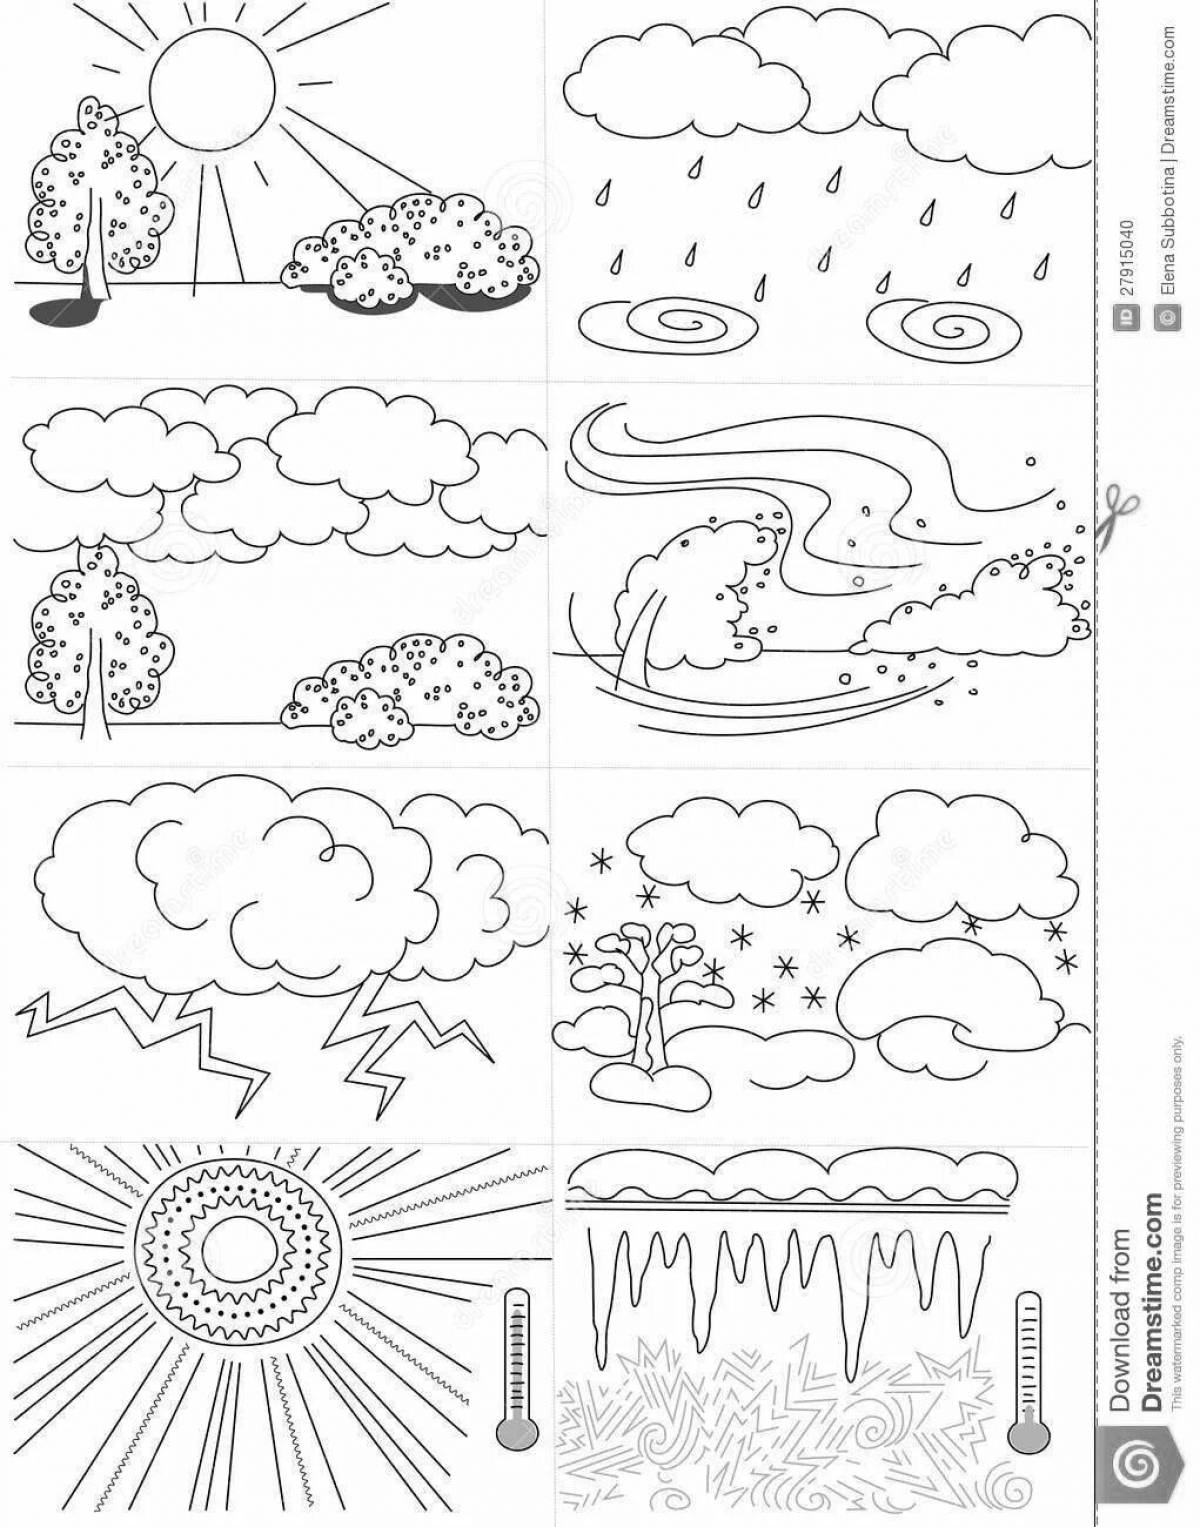 Glowing weather forecast coloring page